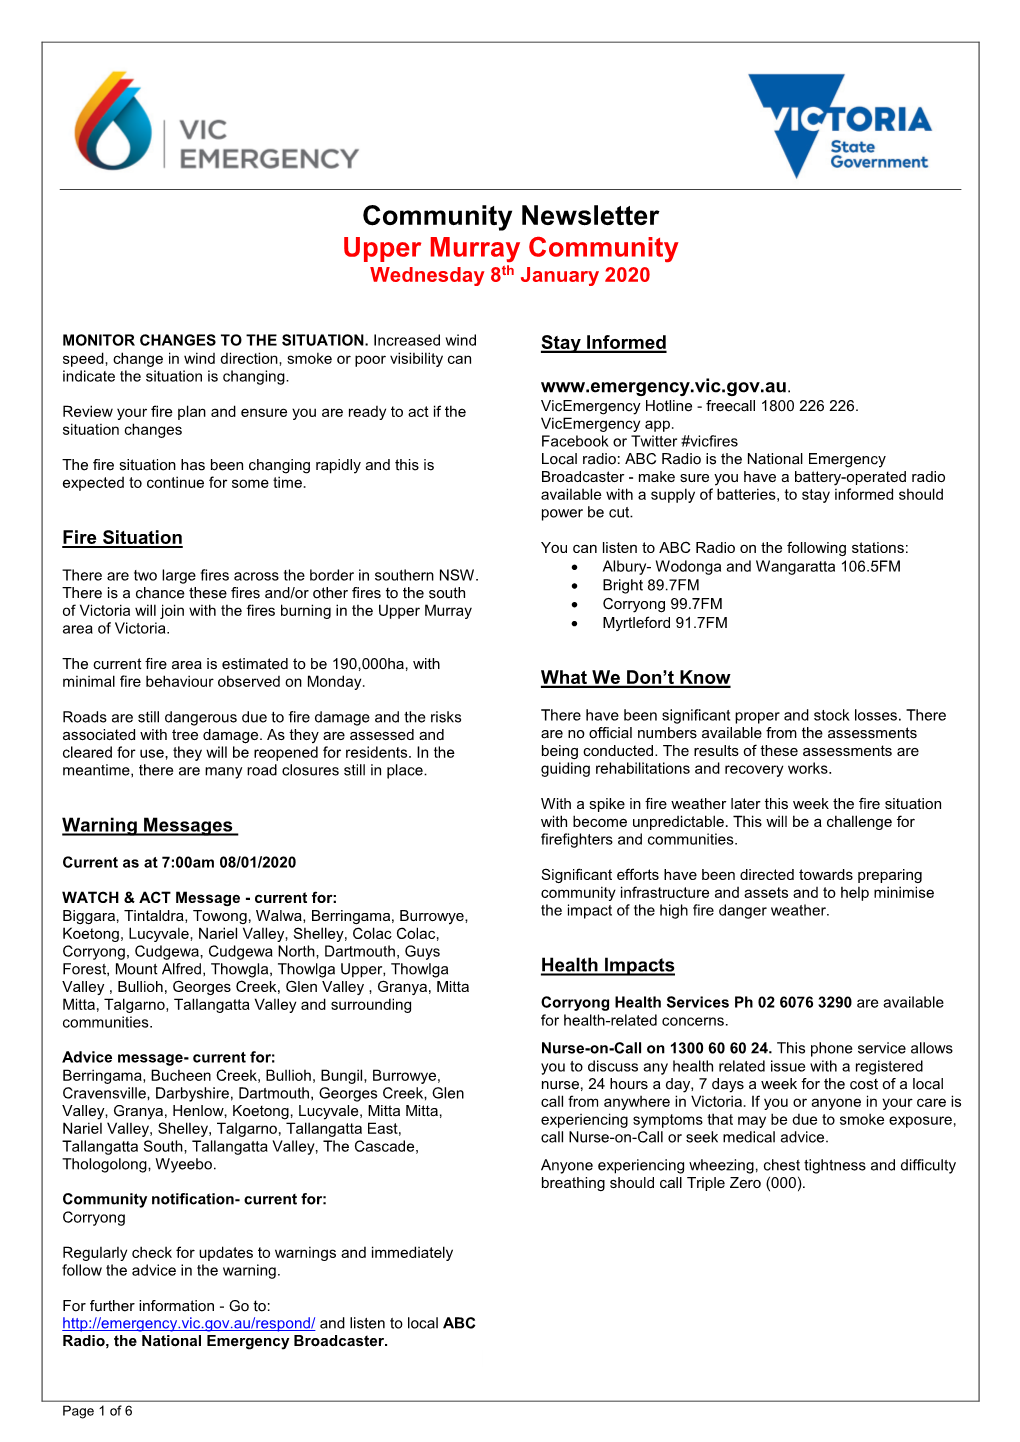 Public Information Section Community Newsletter Template